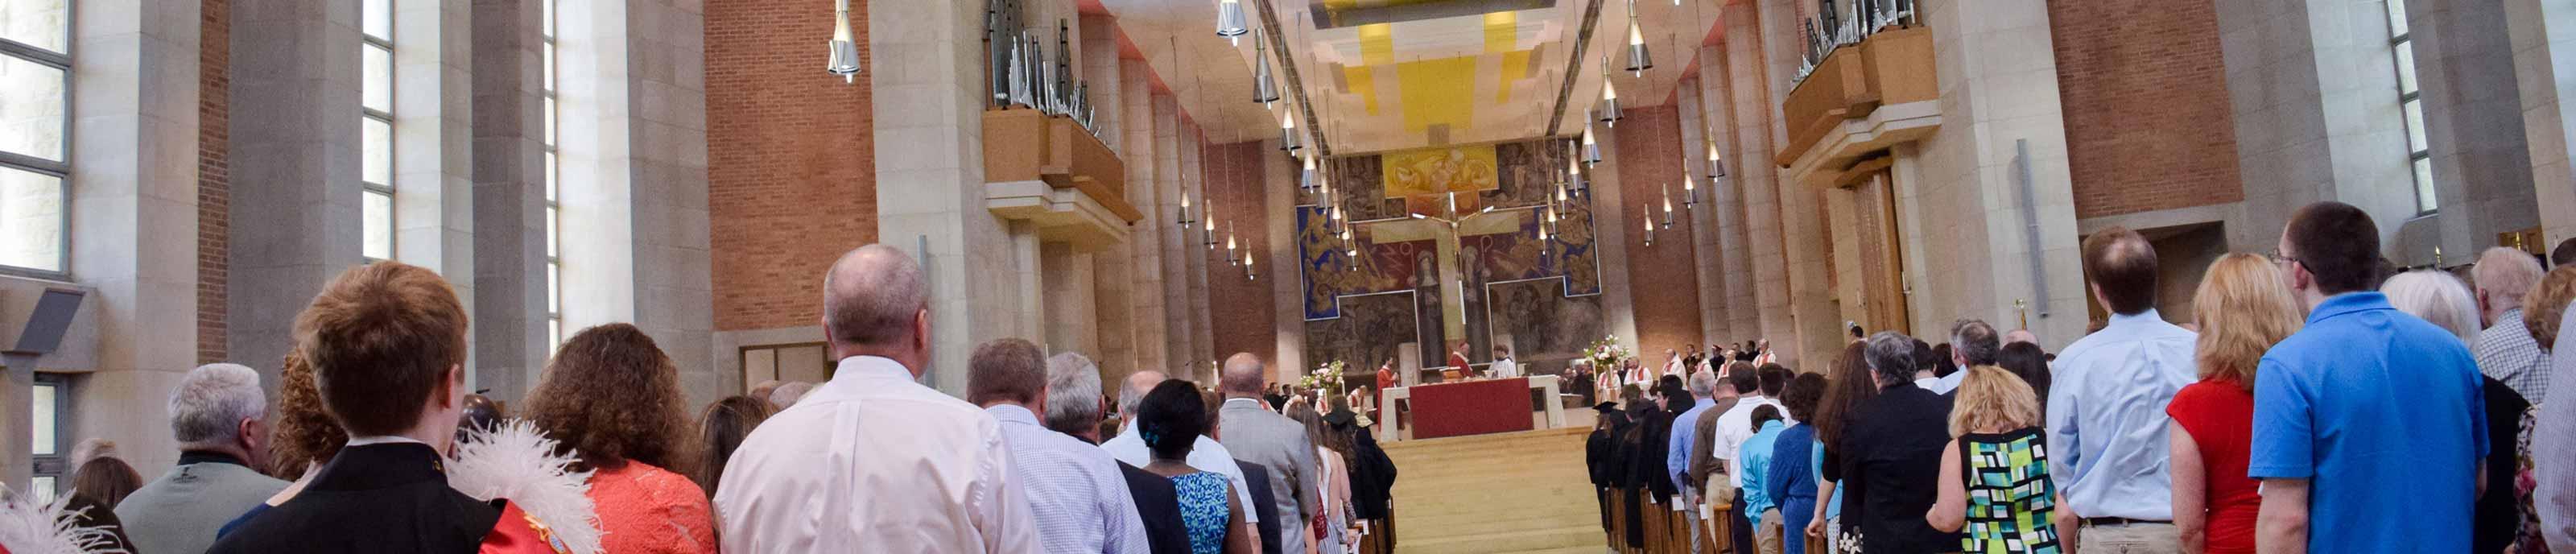 Mass in St. Benedict's Abbey Church